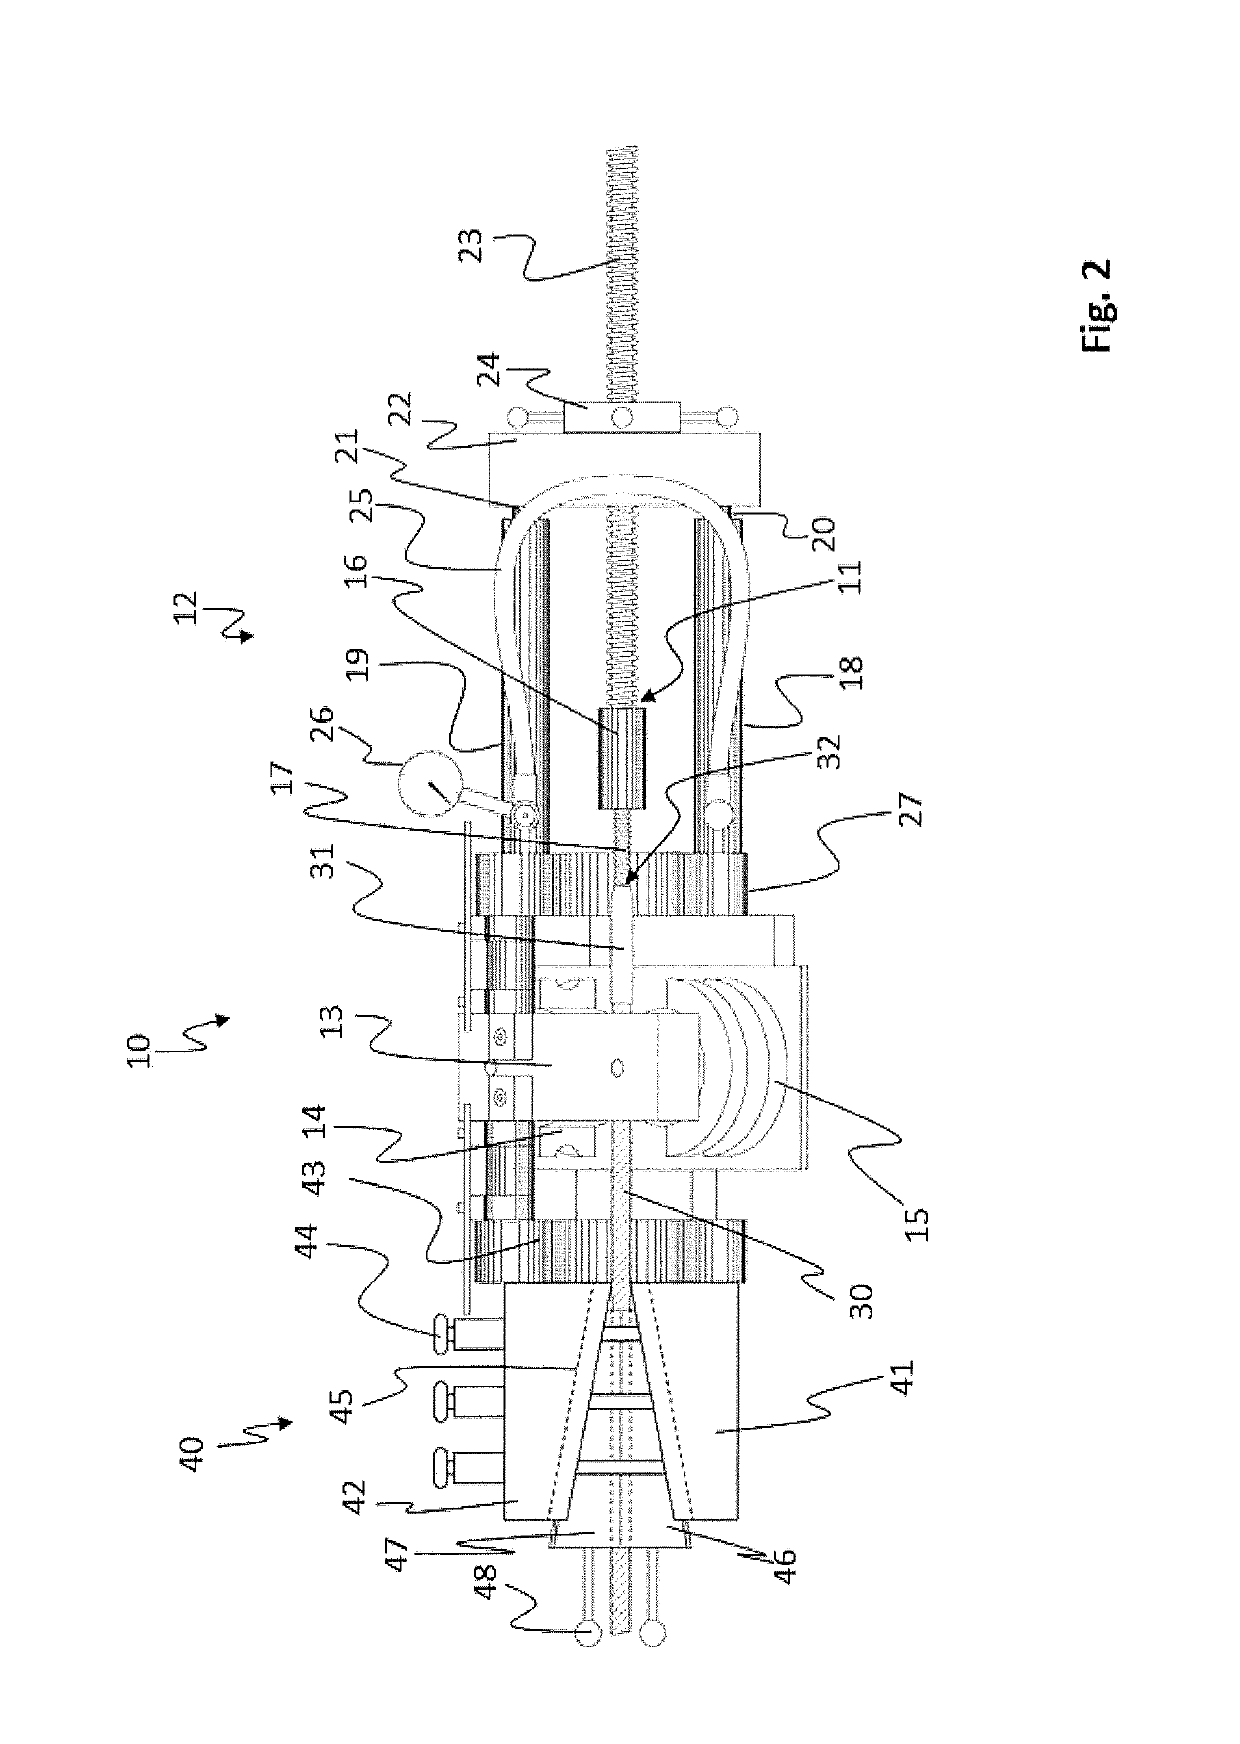 Apparatus and method for attaching and testing a sleeve with a coupling end to a steel wire